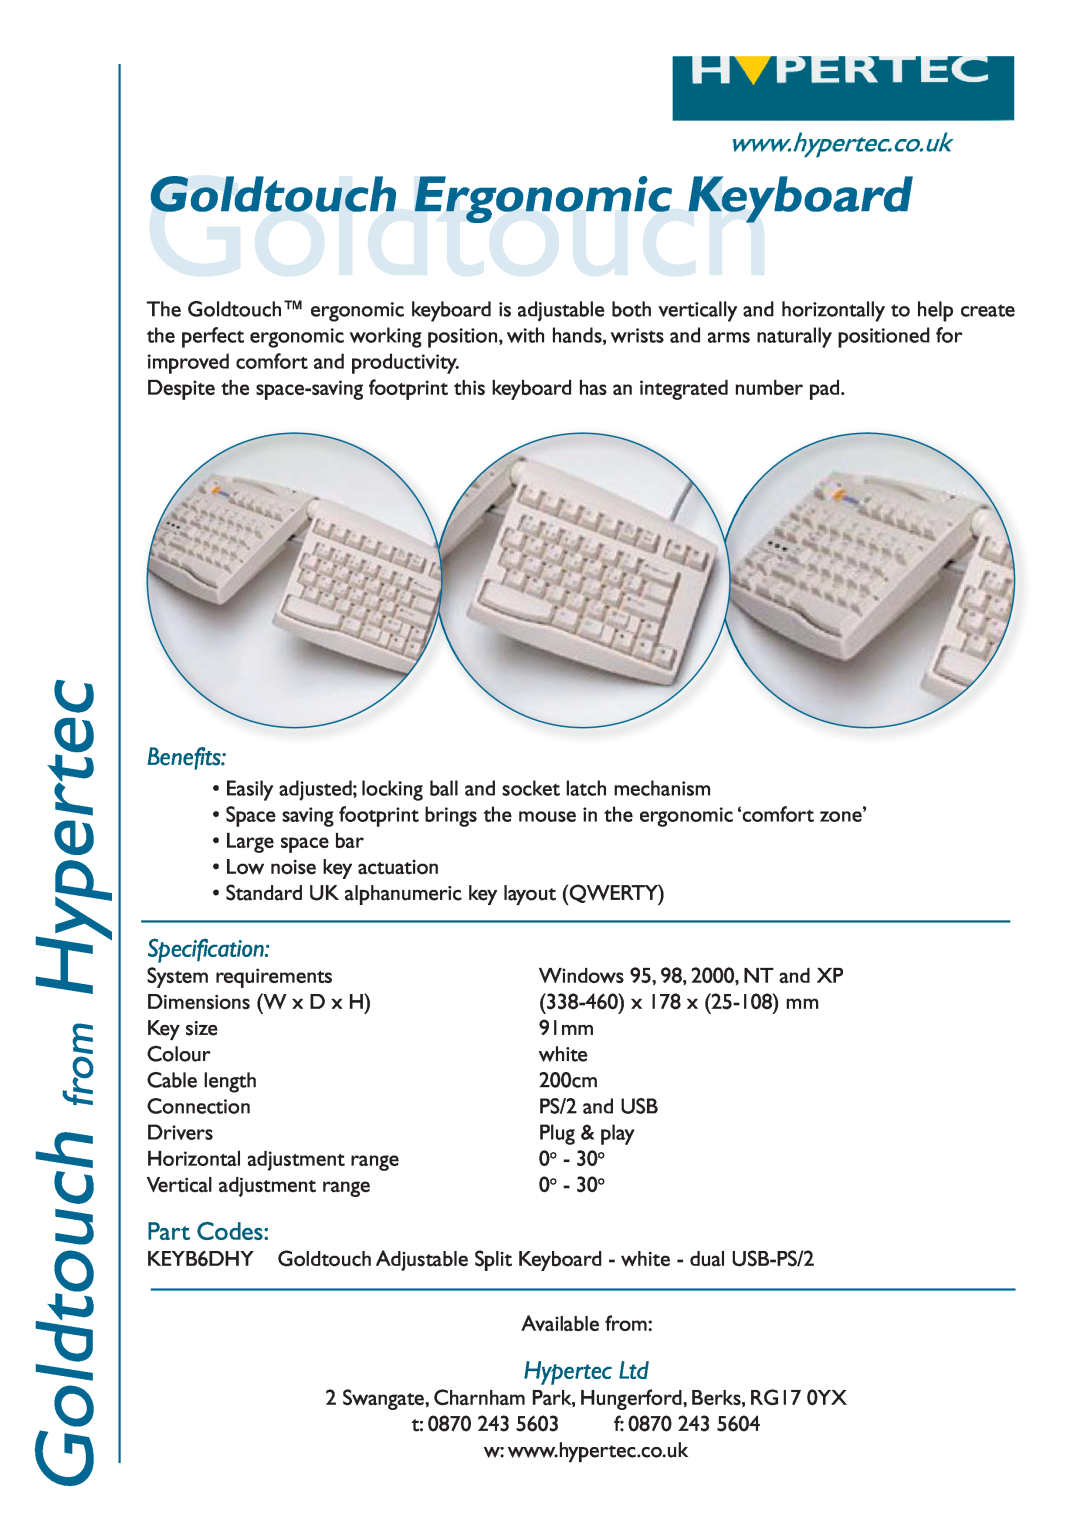 Hypertec KEYB6DHY specifications Goldtouch from Hypertec, Benefits, Specification, Part Codes 